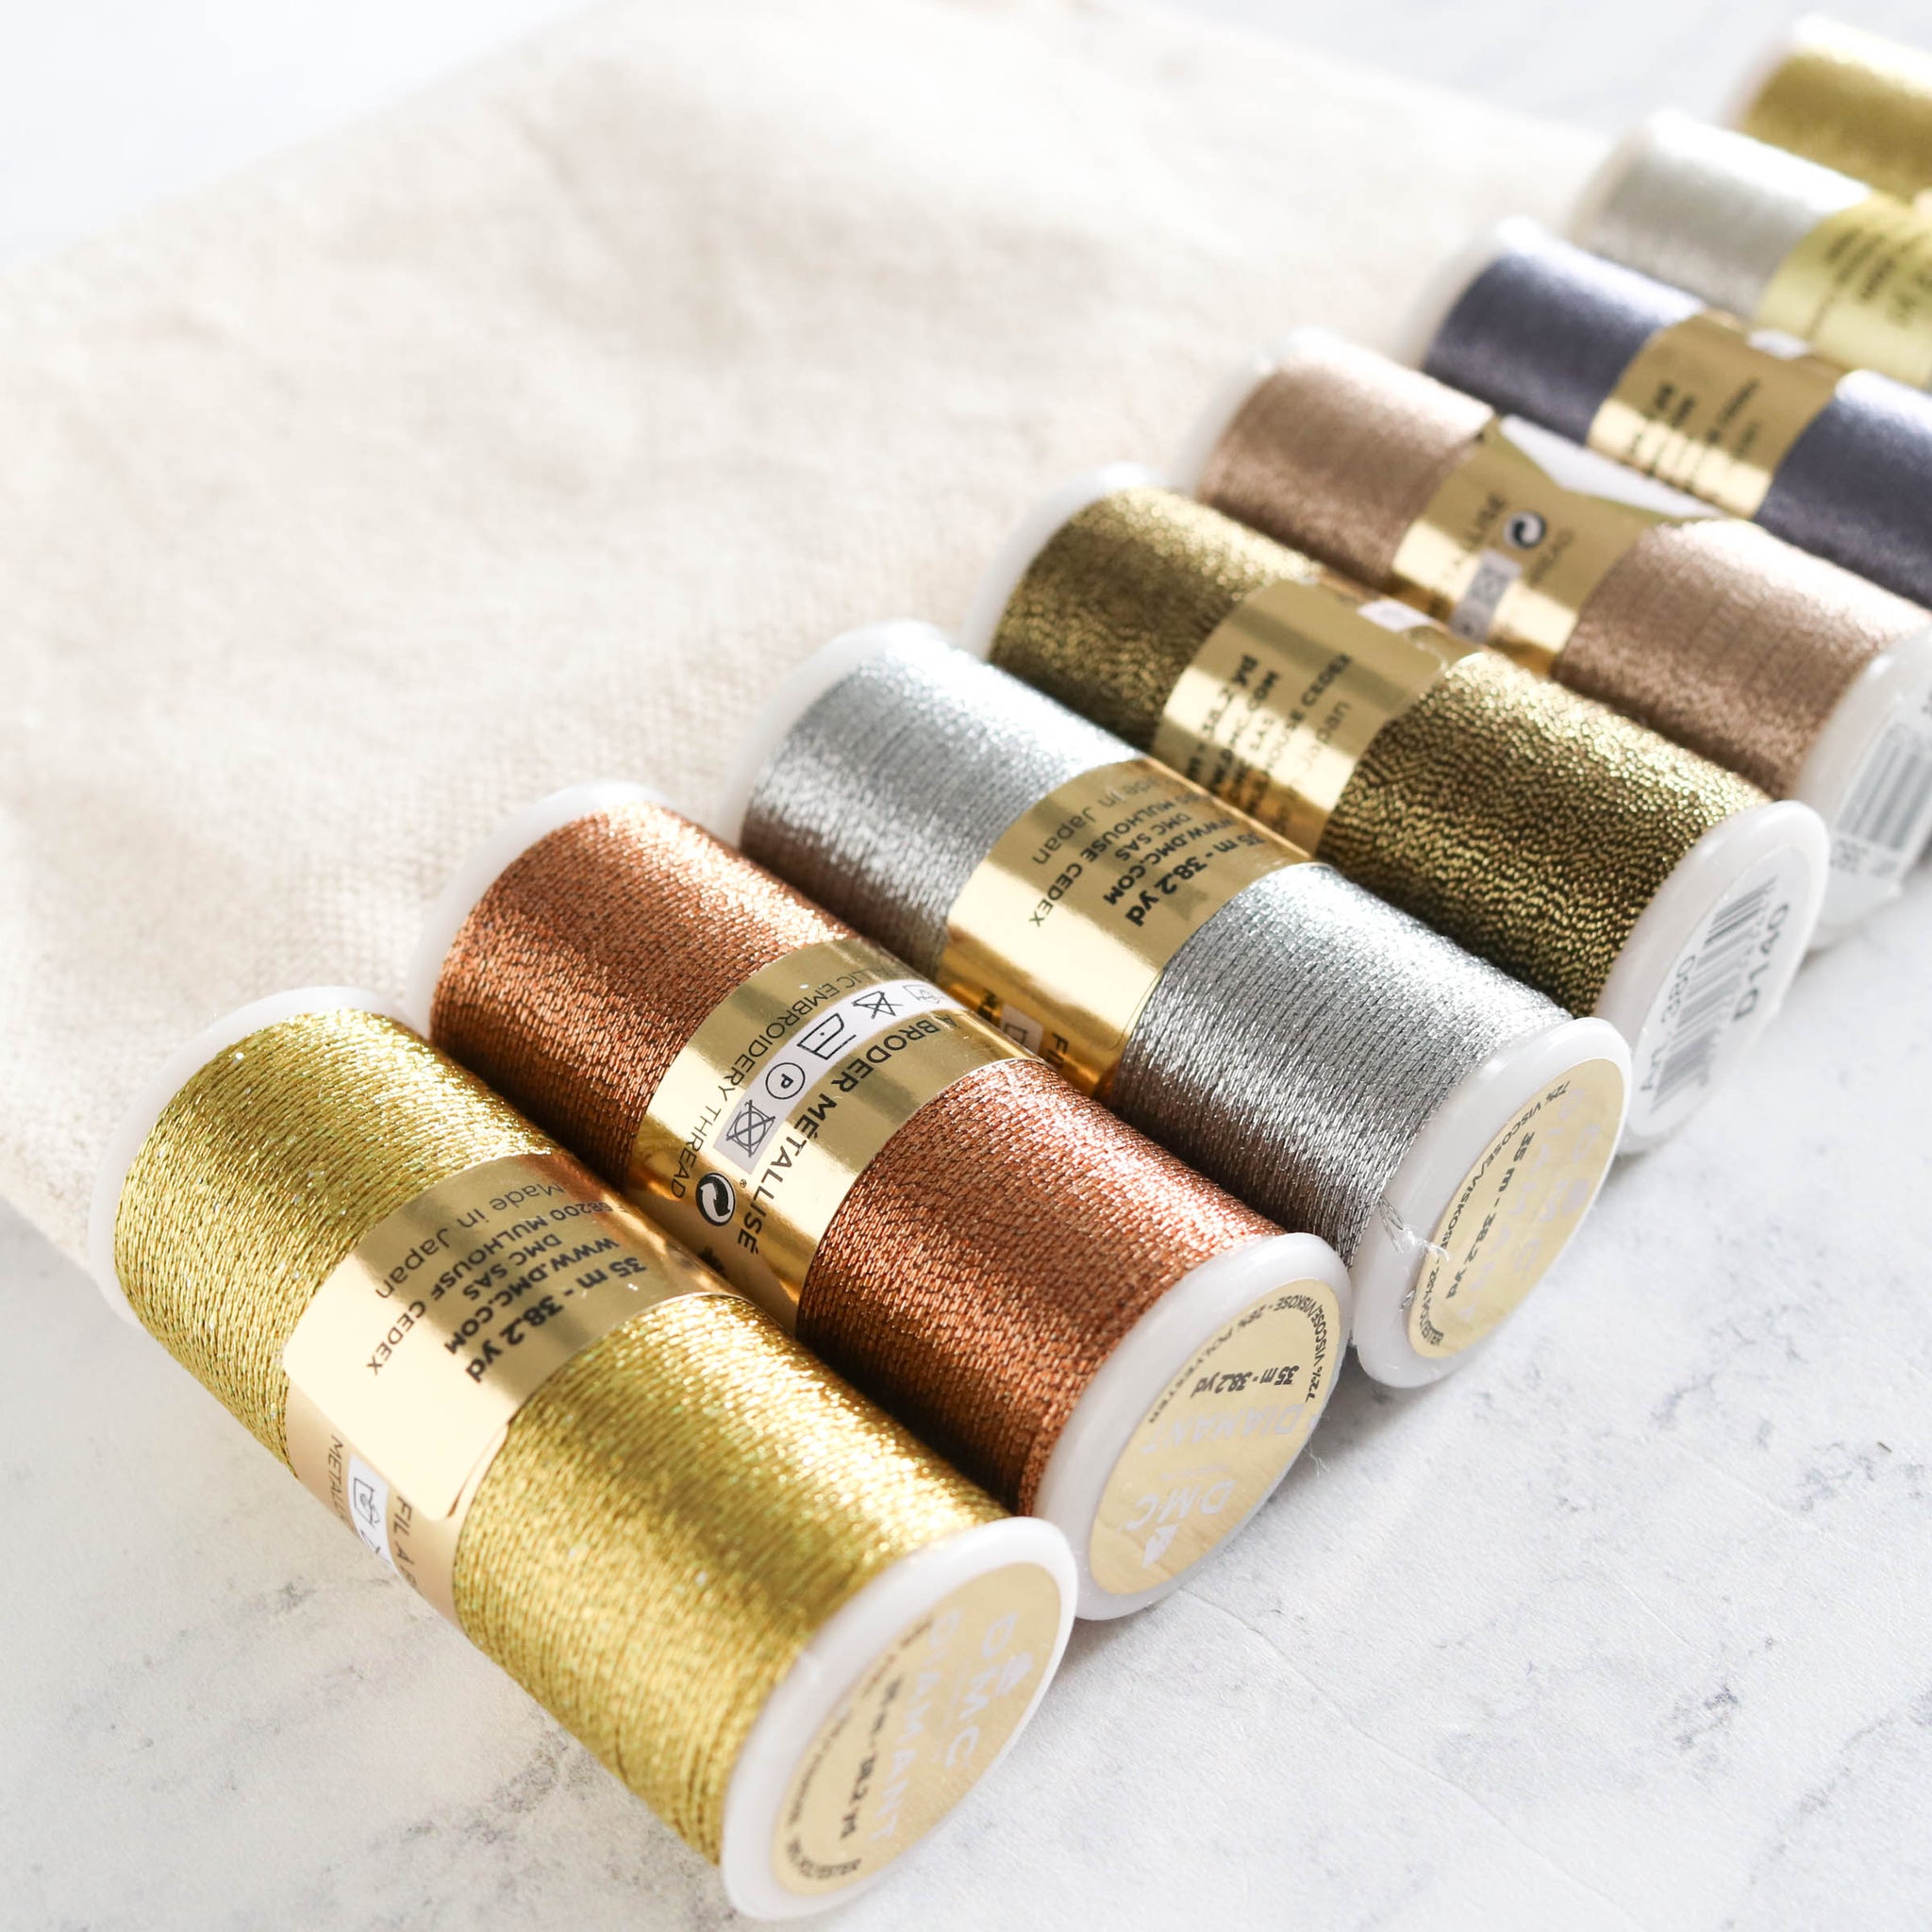 DMC Diamant Metallic Embroidery Thread - Metal Color Pack - Stitched Modern